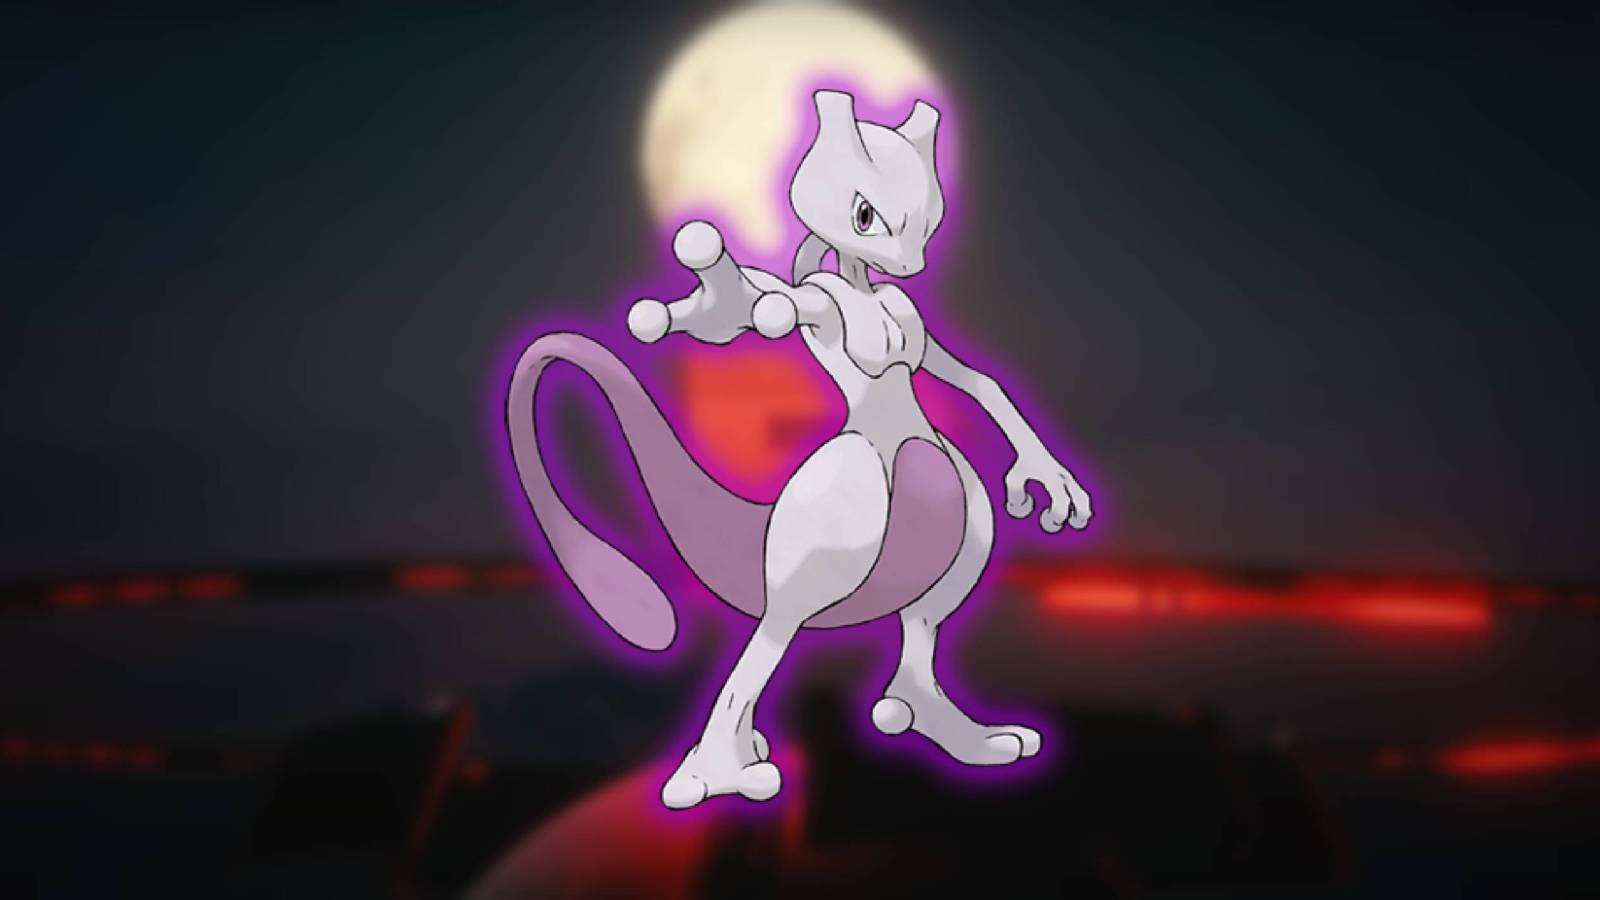 The Pokemon Mewtwo appears against a blurred background, with a purple aura surrounding it